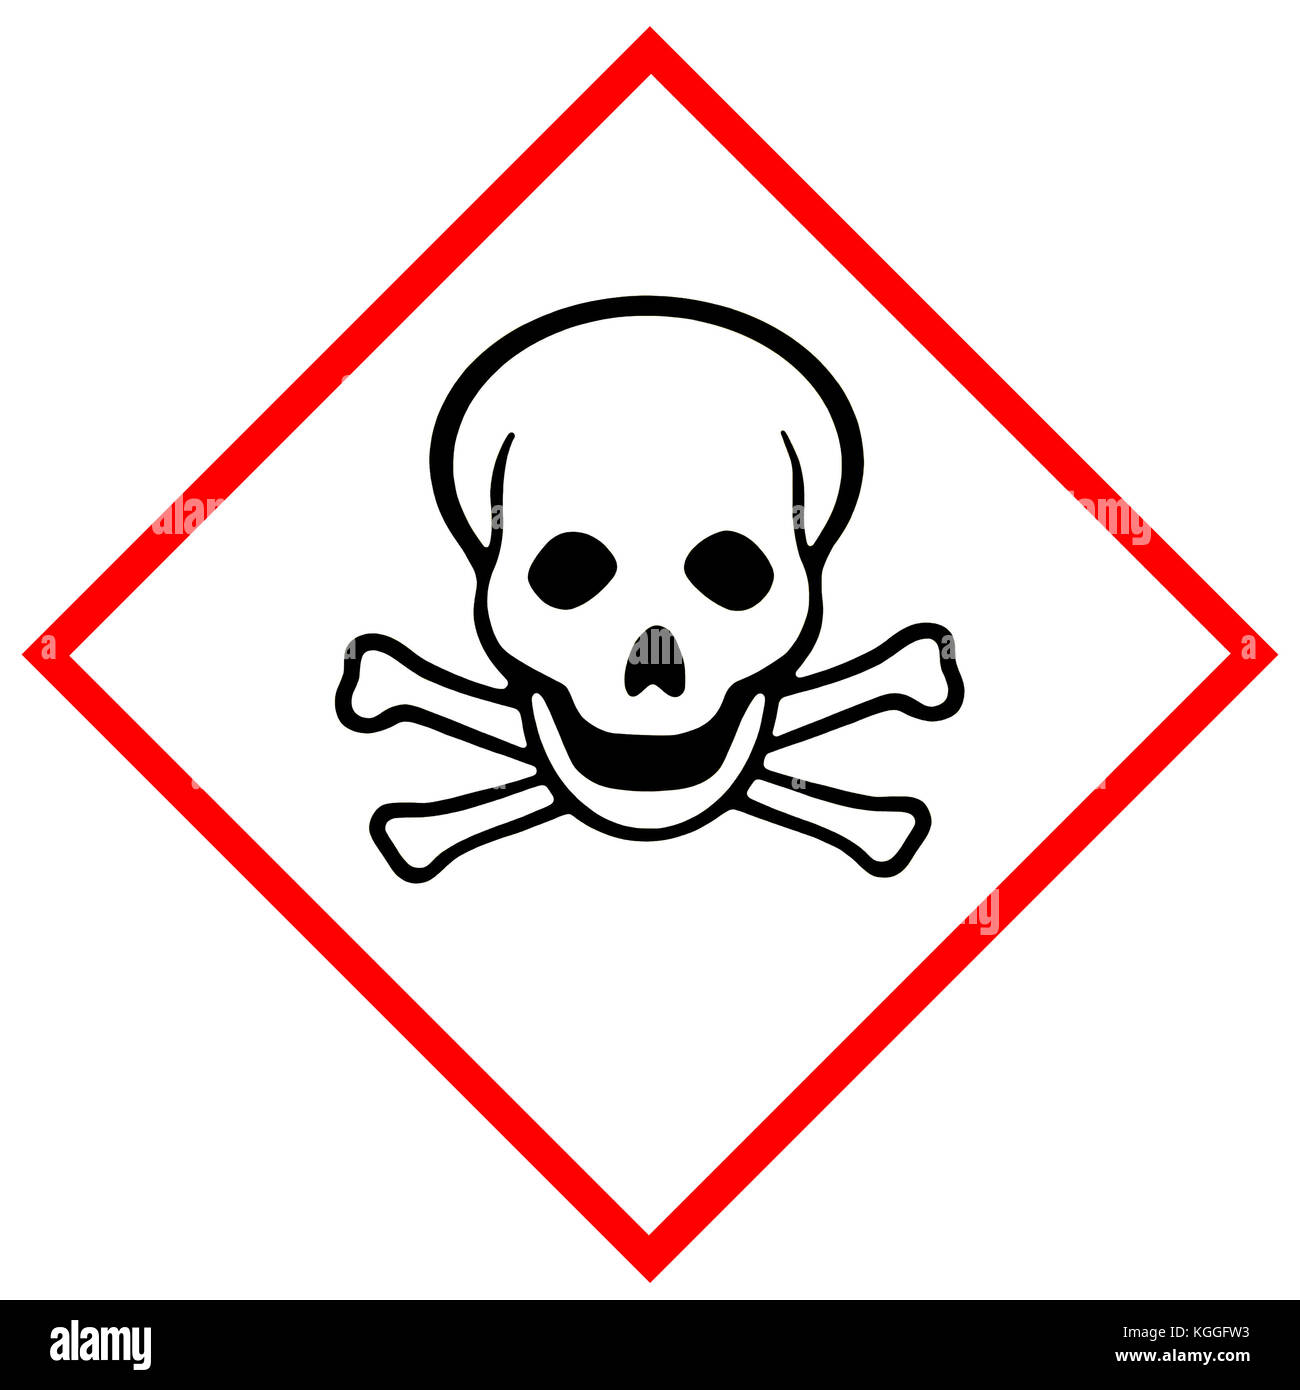 Acute toxicity a symbol of  skull and crossbones Stock Photo